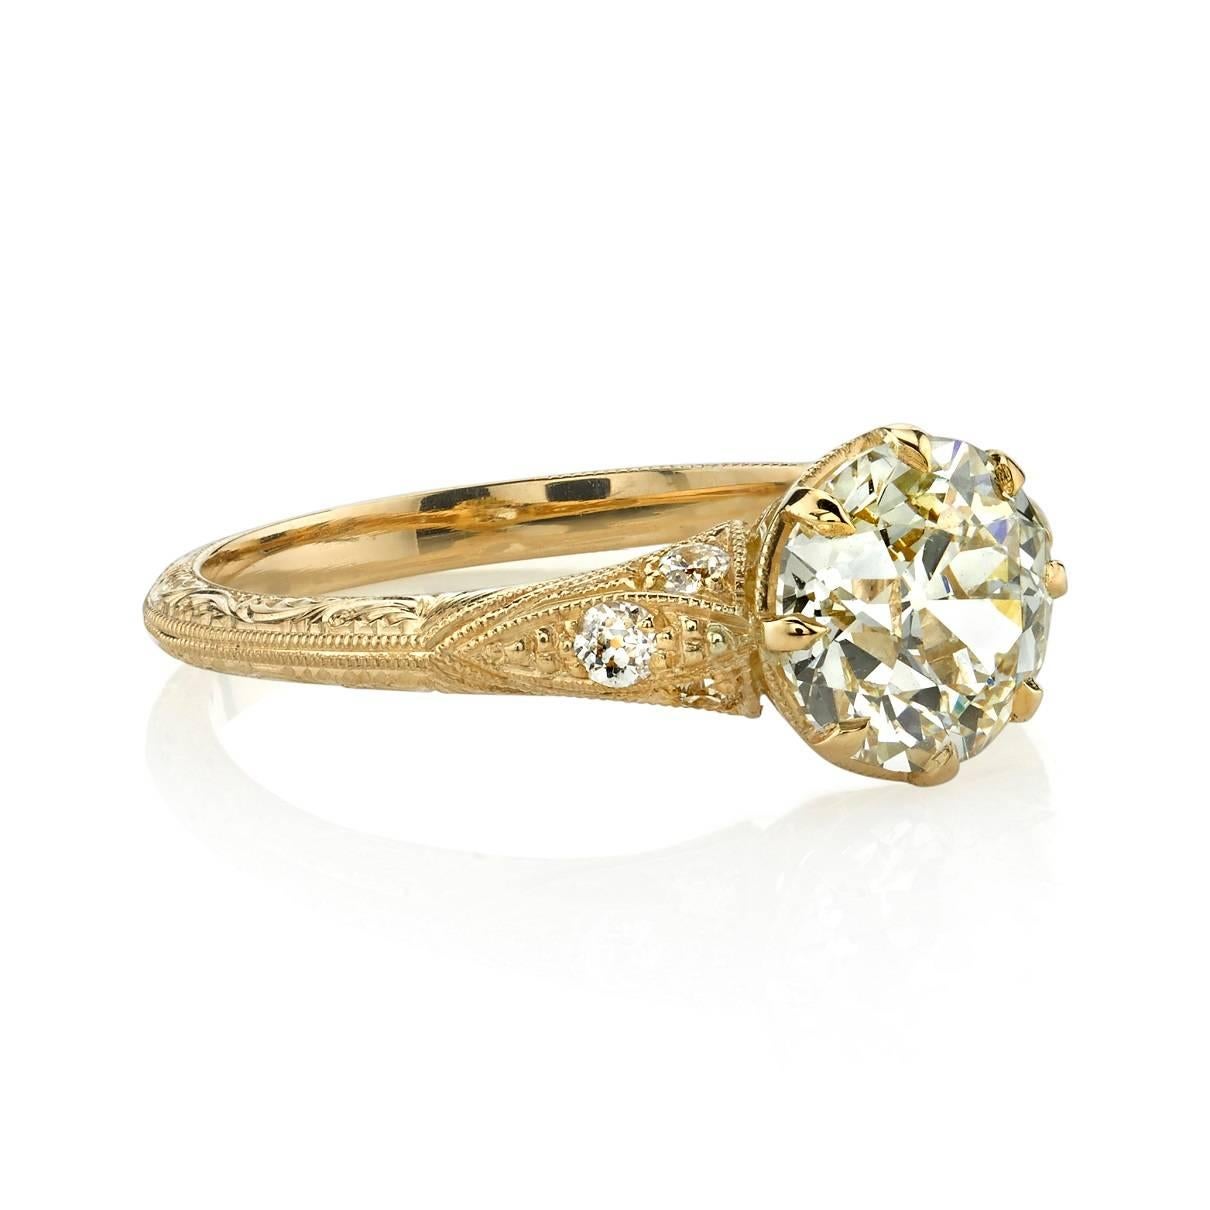 1.53ct J/VS1 old European cut diamond EGL certified and set in a handcrafted 18k yellow gold mounting.  A classic Edwardian inspired design that features tapered engraved band and an intricate gallery.